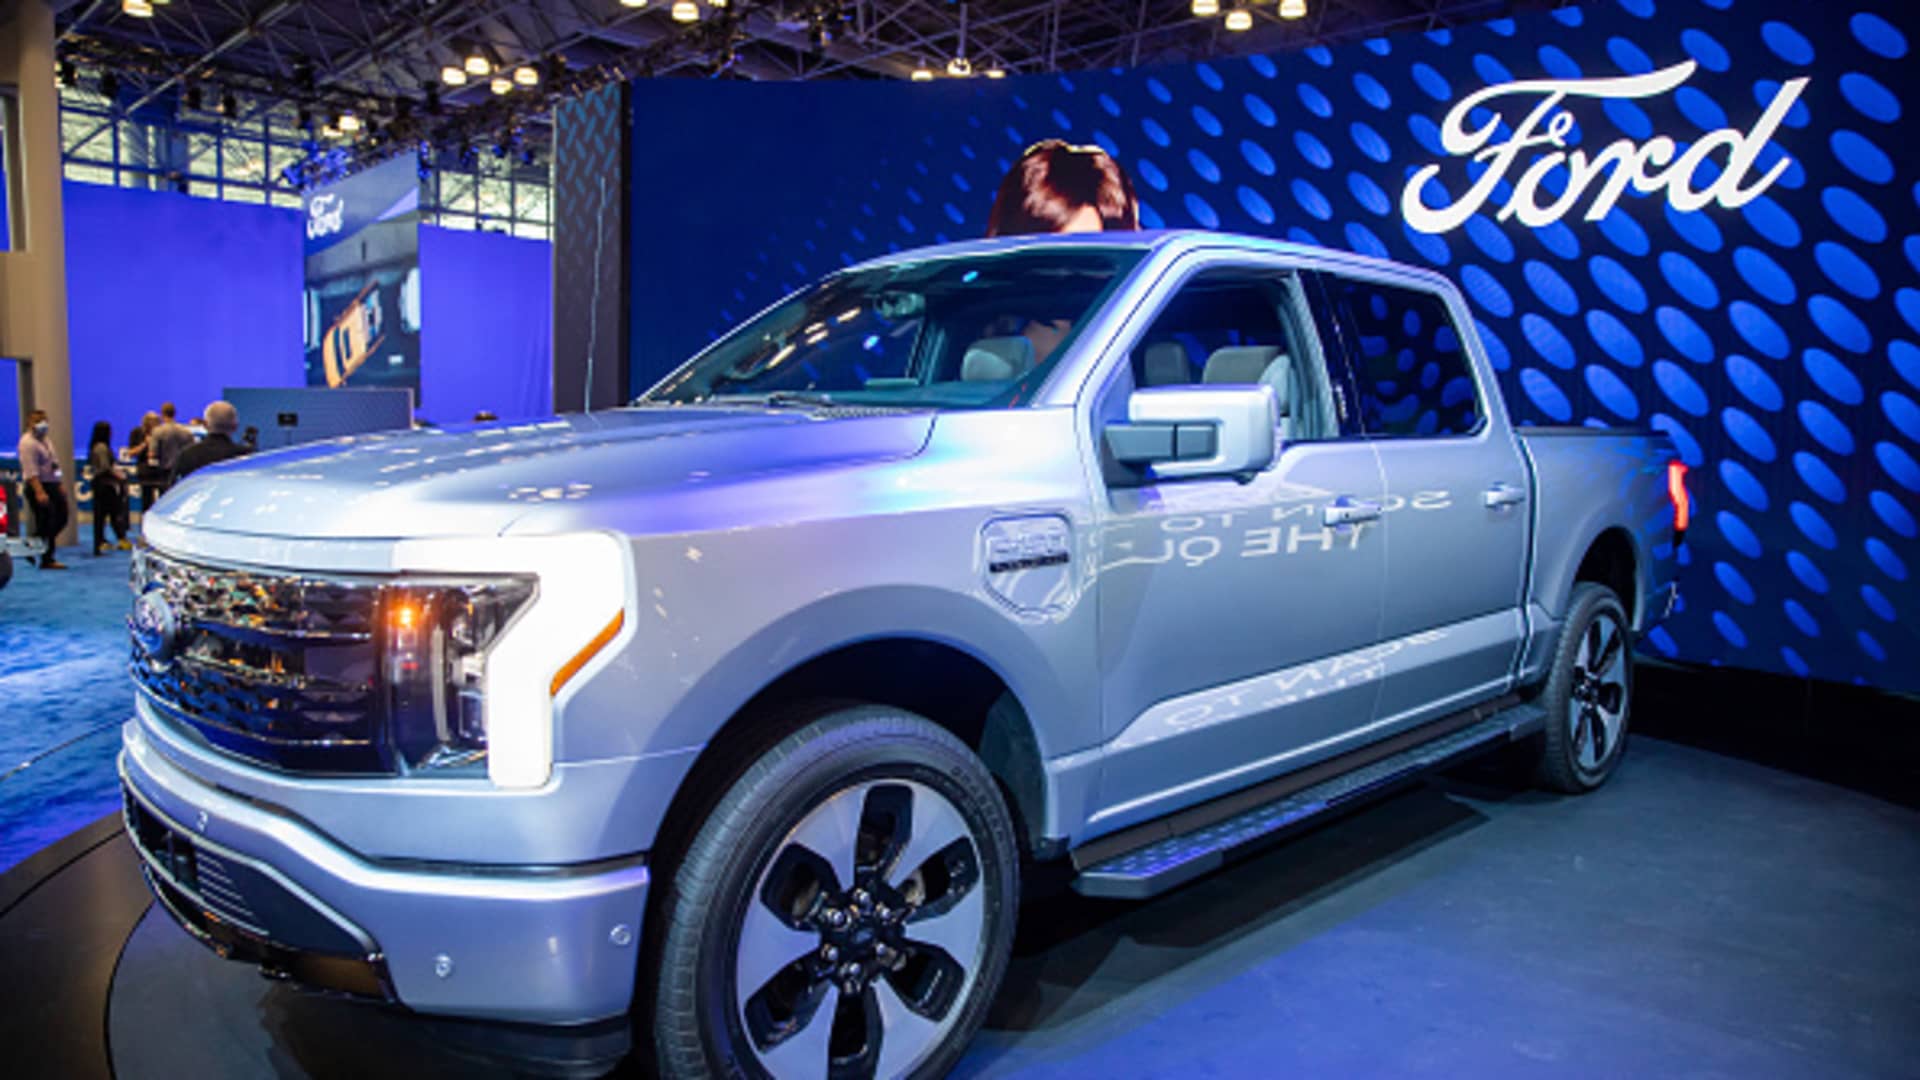 Ford posts stellar first quarter, boosted by fleet and legacy truck divisions